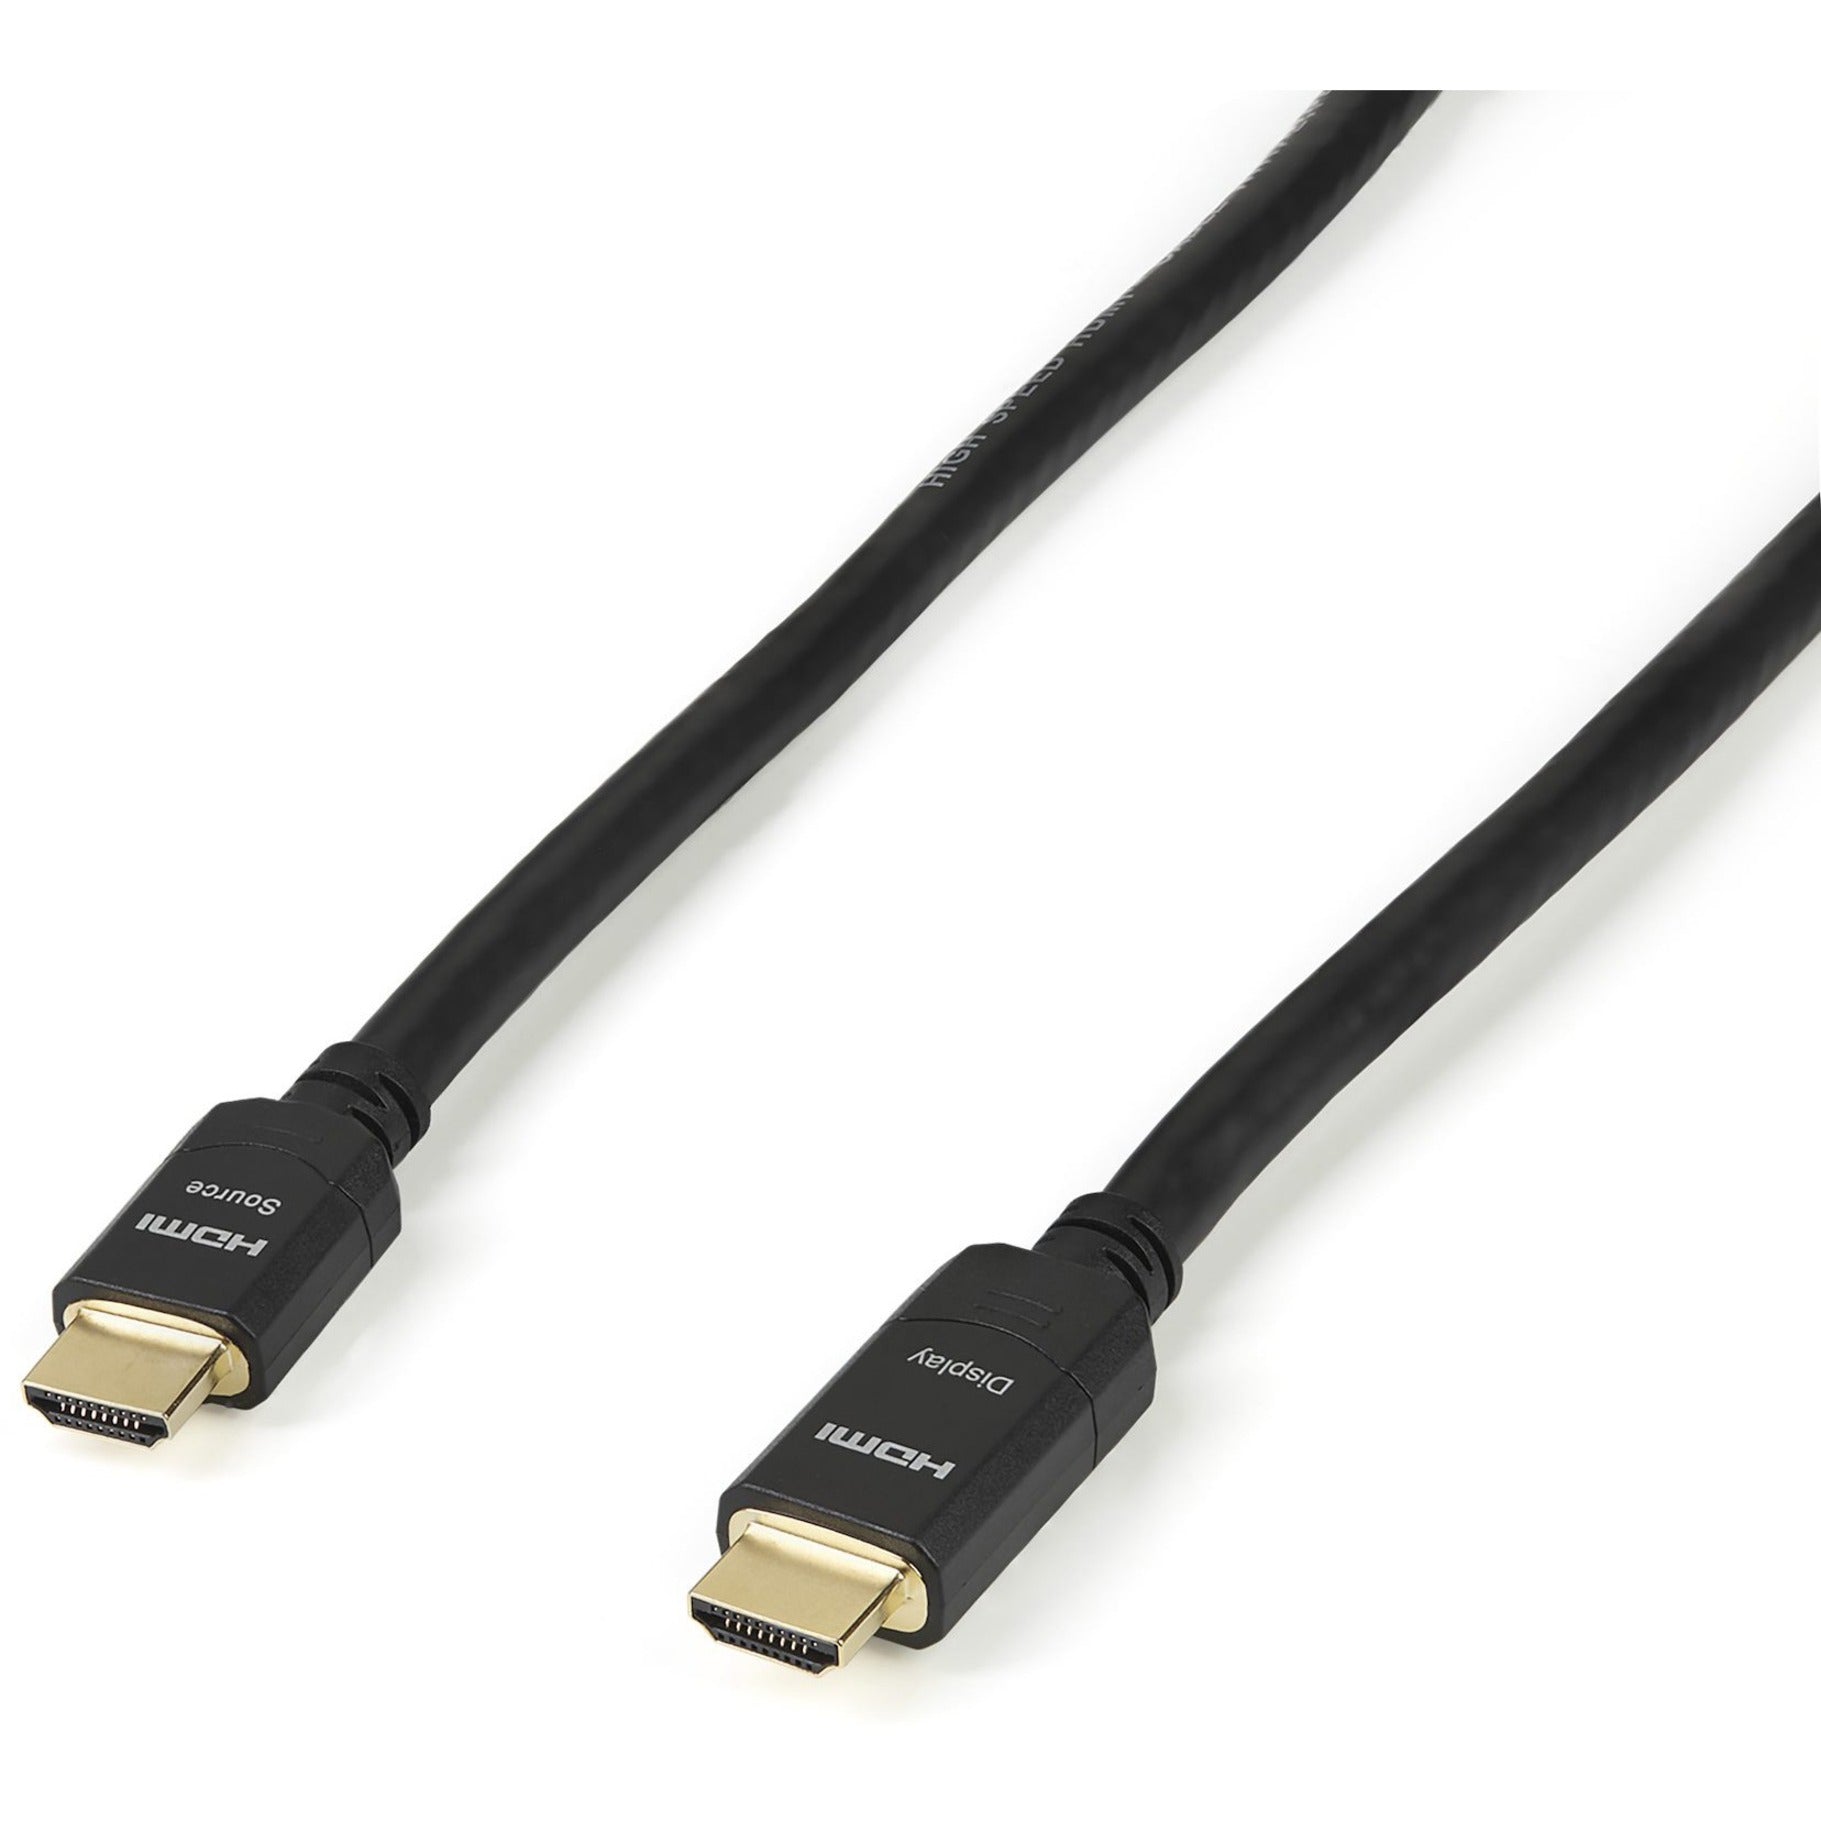 StarTech.com HDMM30MA 30m 100 ft High Speed HDMI Cable M/M - Active CL2 In-Wall StarTech.com HDMM30MA 30m 100 pi Câble HDMI haute vitesse M/M - Actif CL2 In-Wall